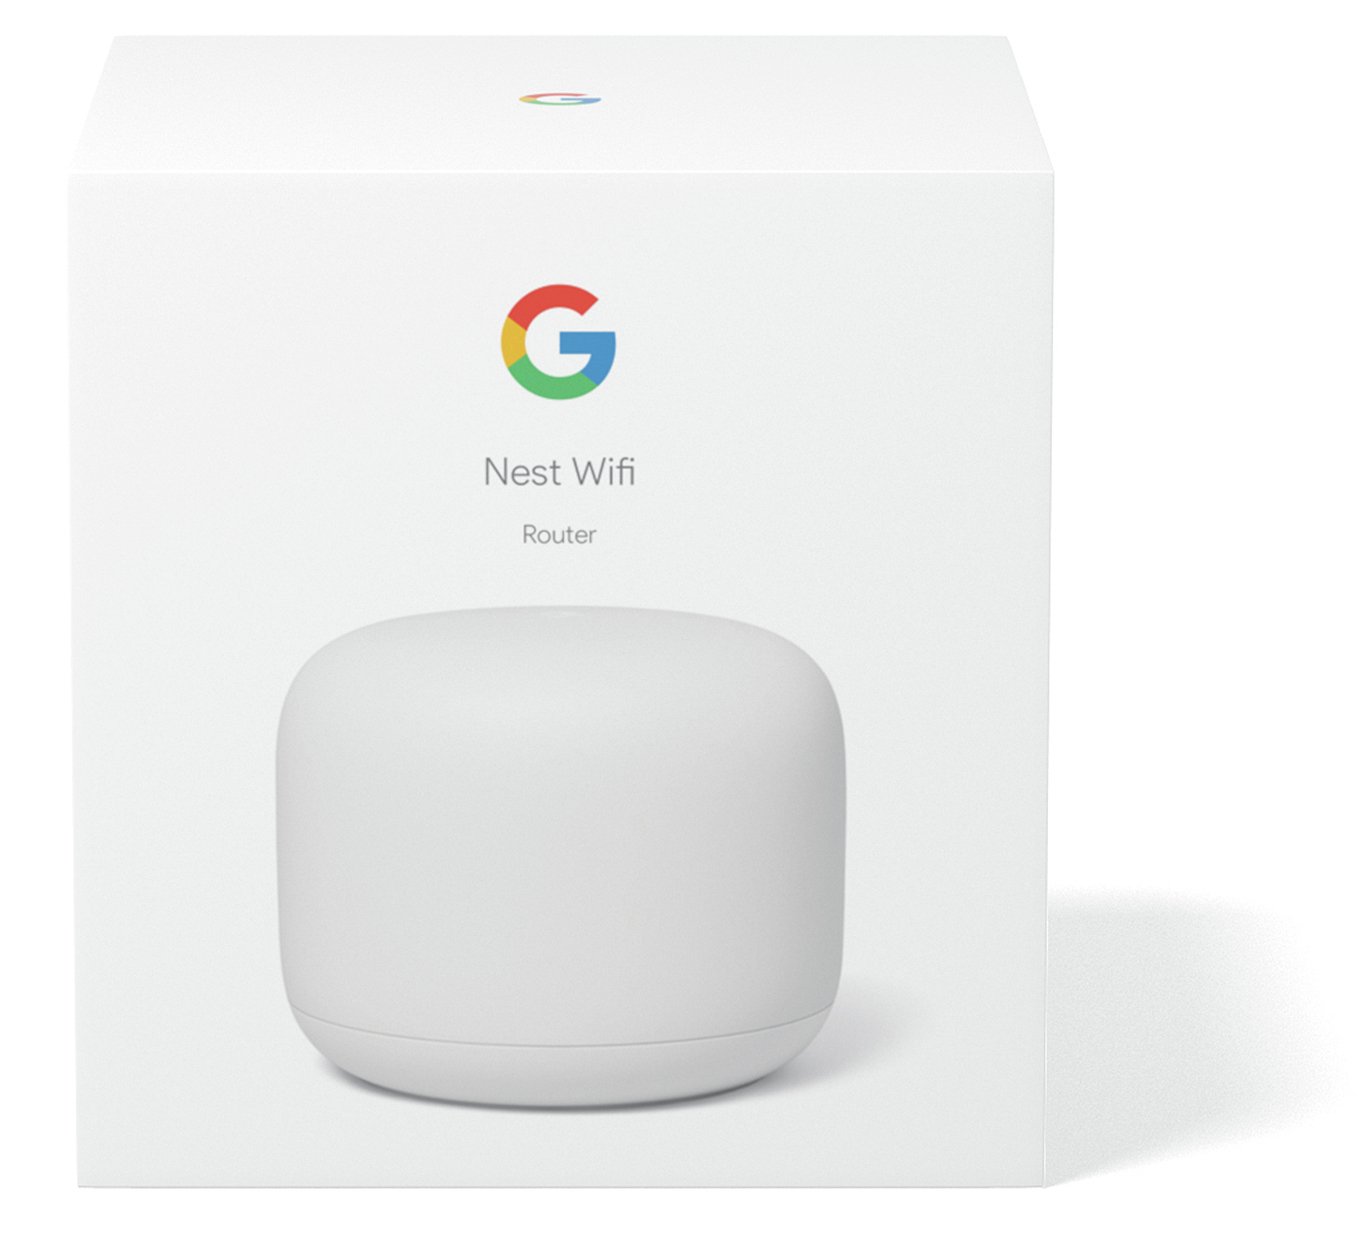 Google Nest Wi-Fi Router Review